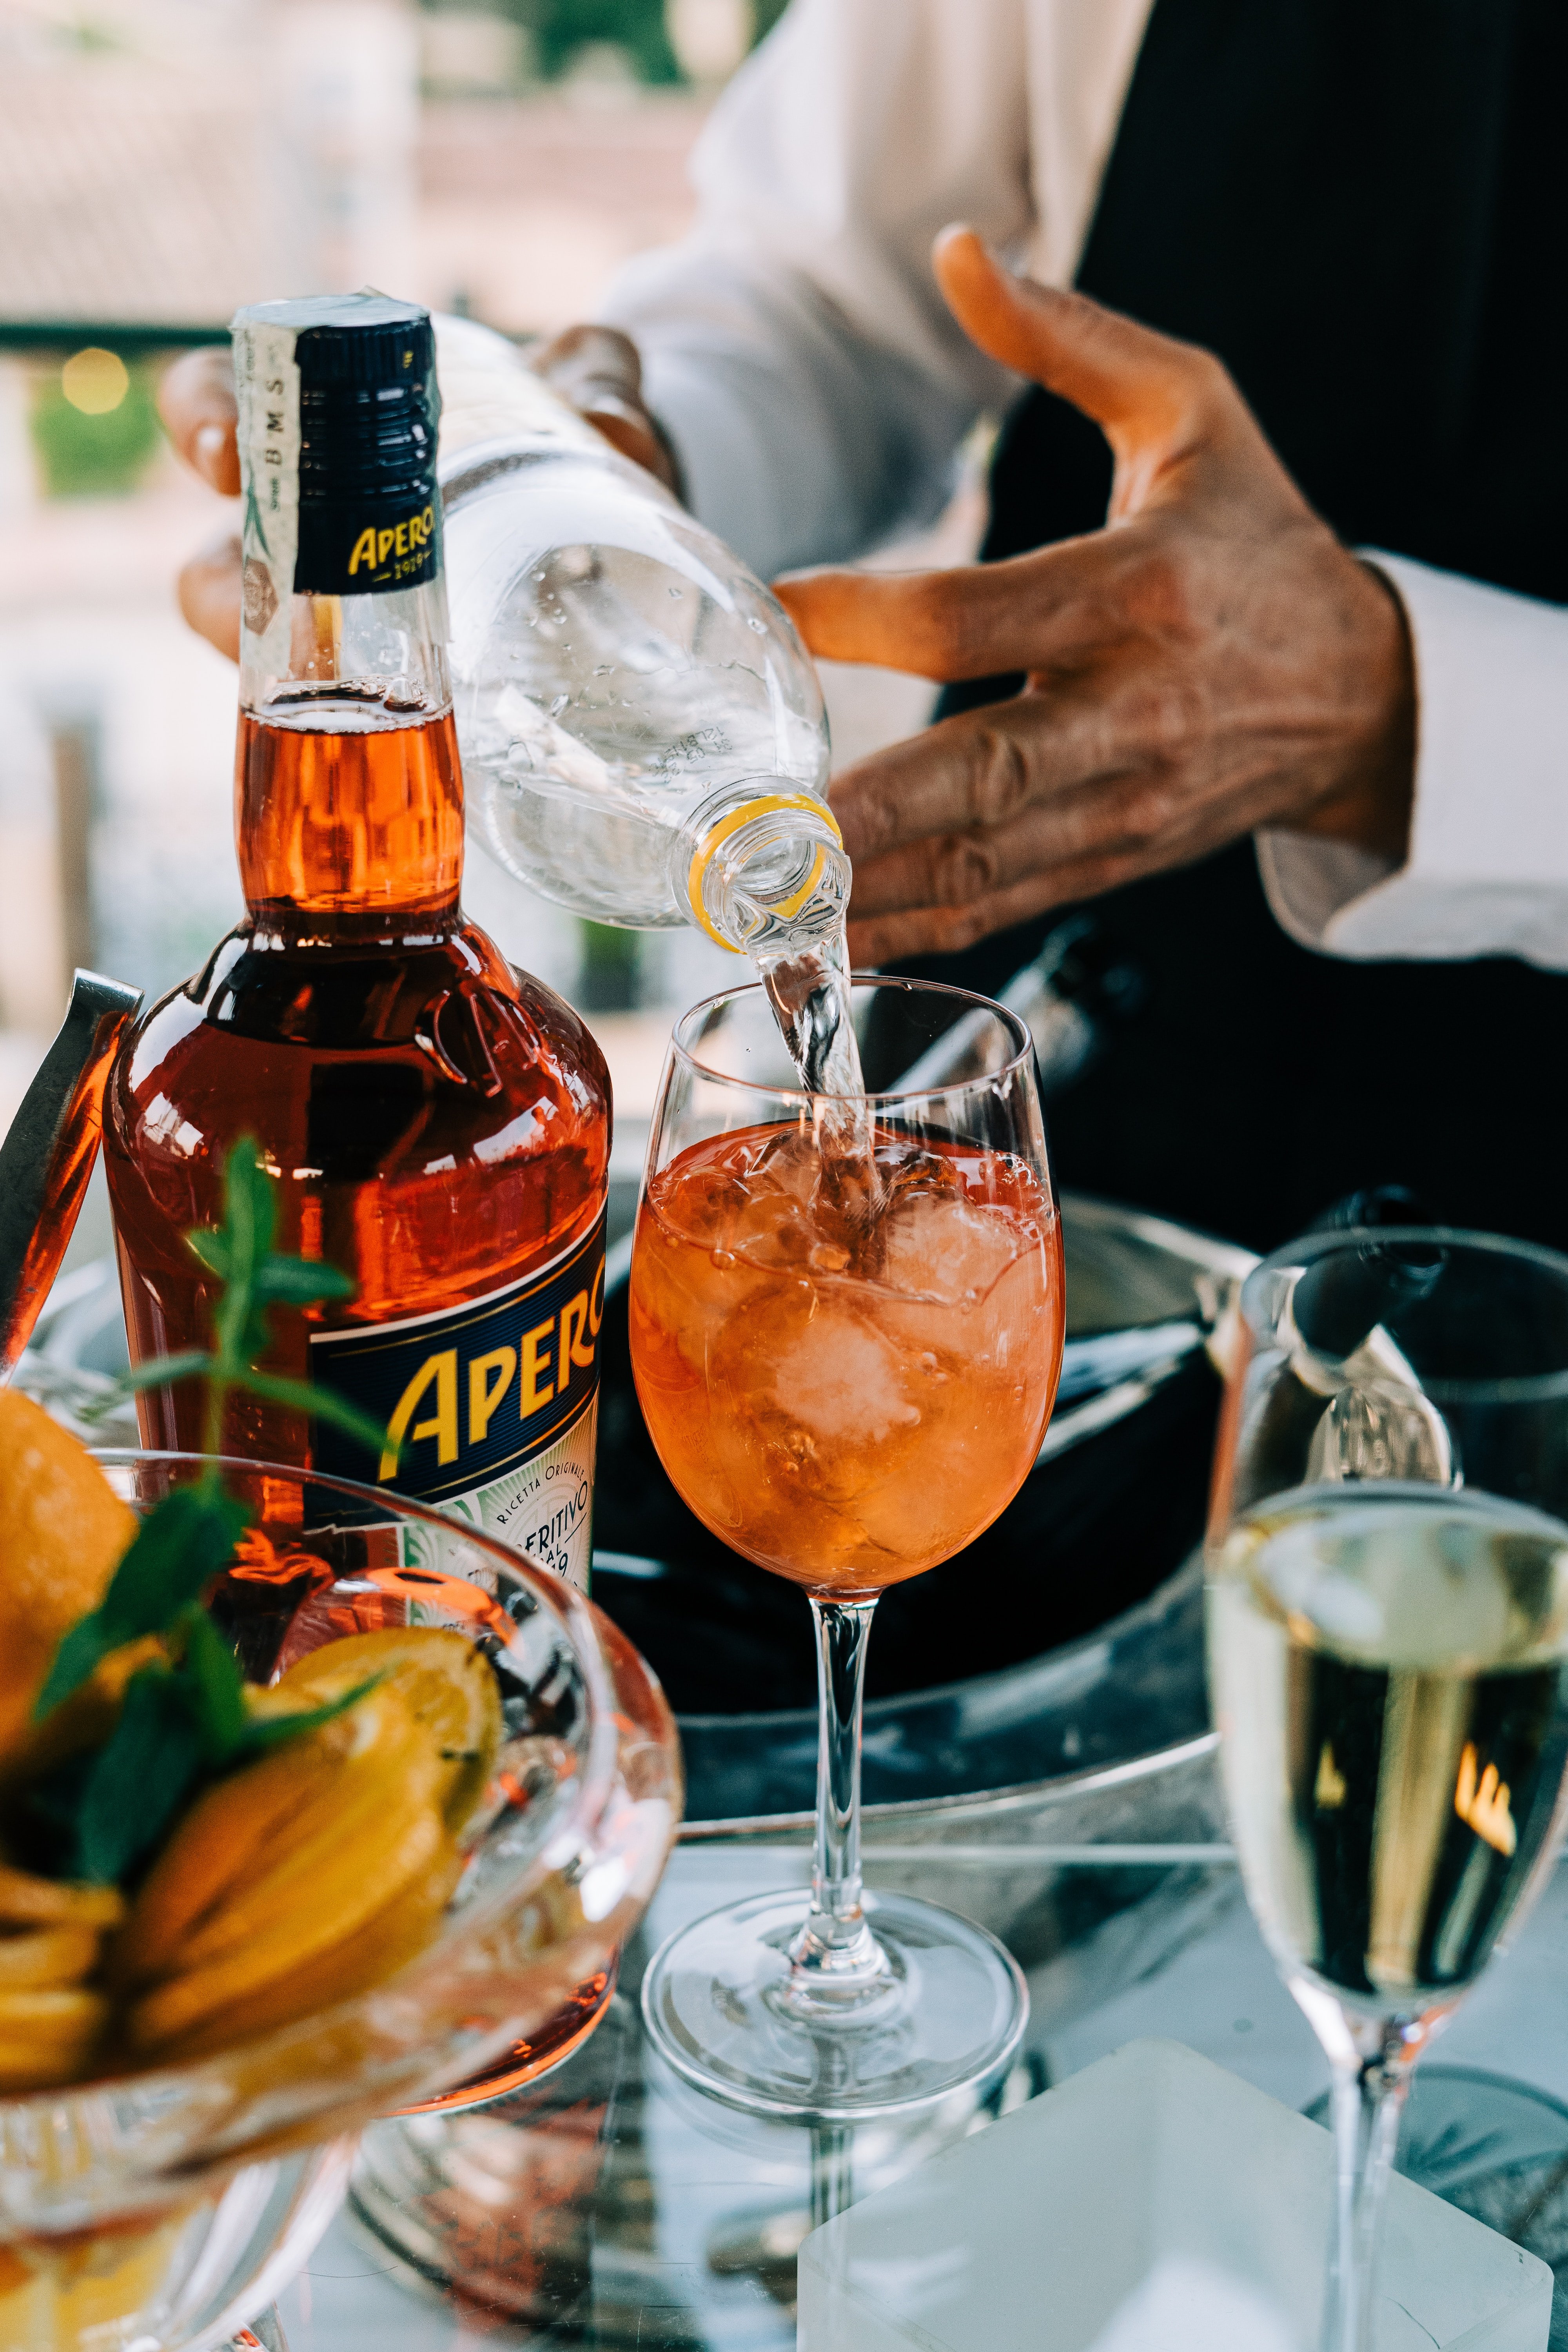 A bottle of aperol next to a aperol spritz